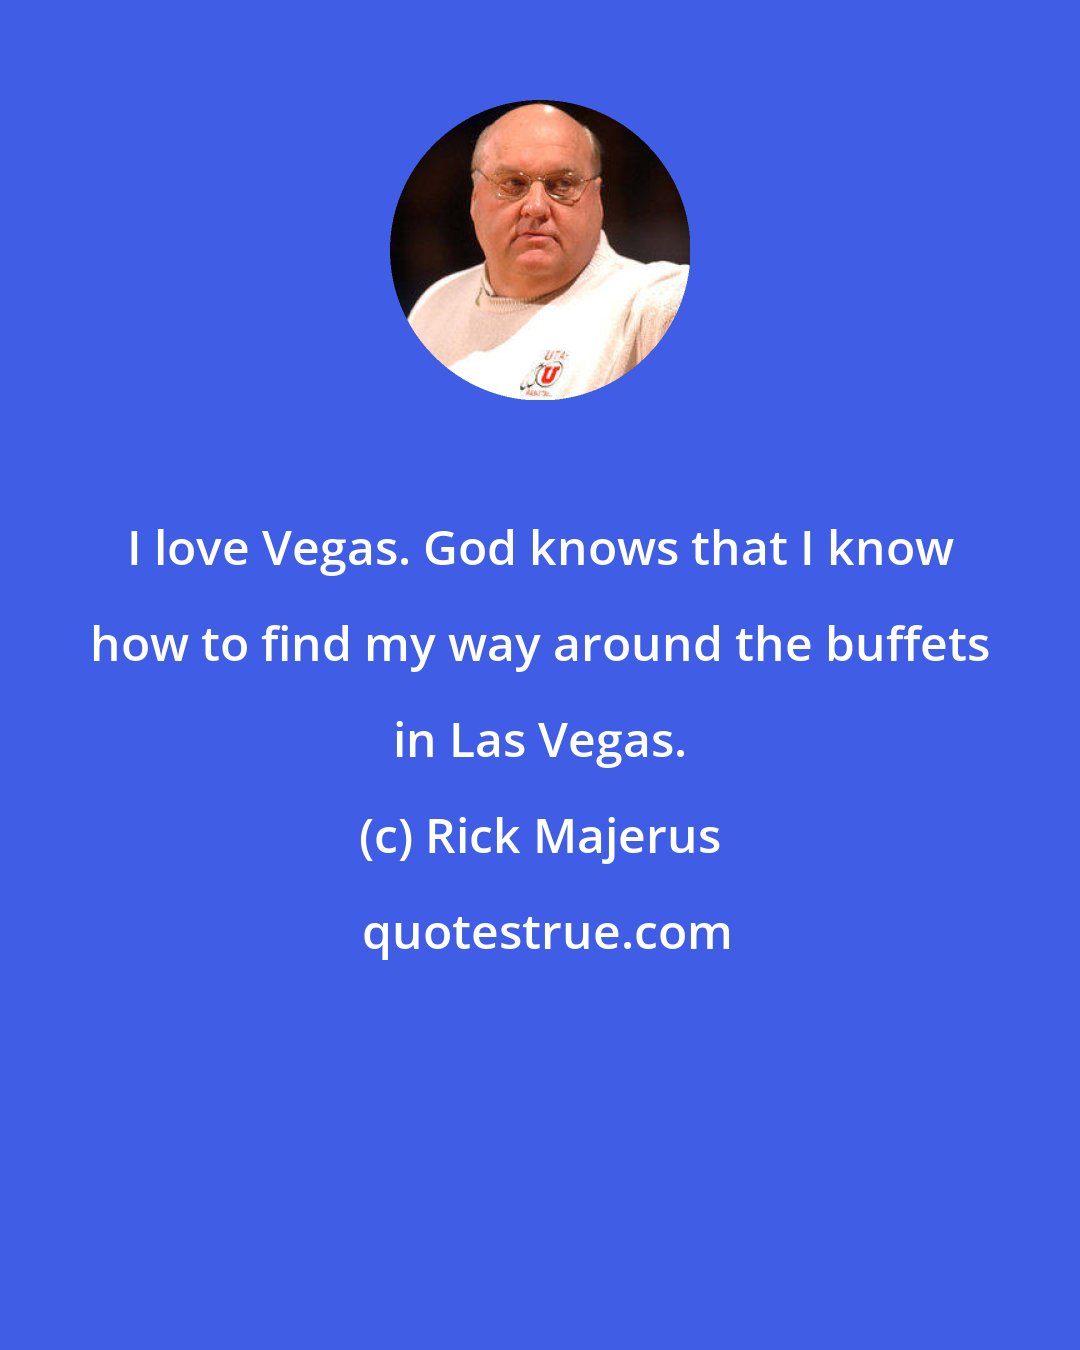 Rick Majerus: I love Vegas. God knows that I know how to find my way around the buffets in Las Vegas.